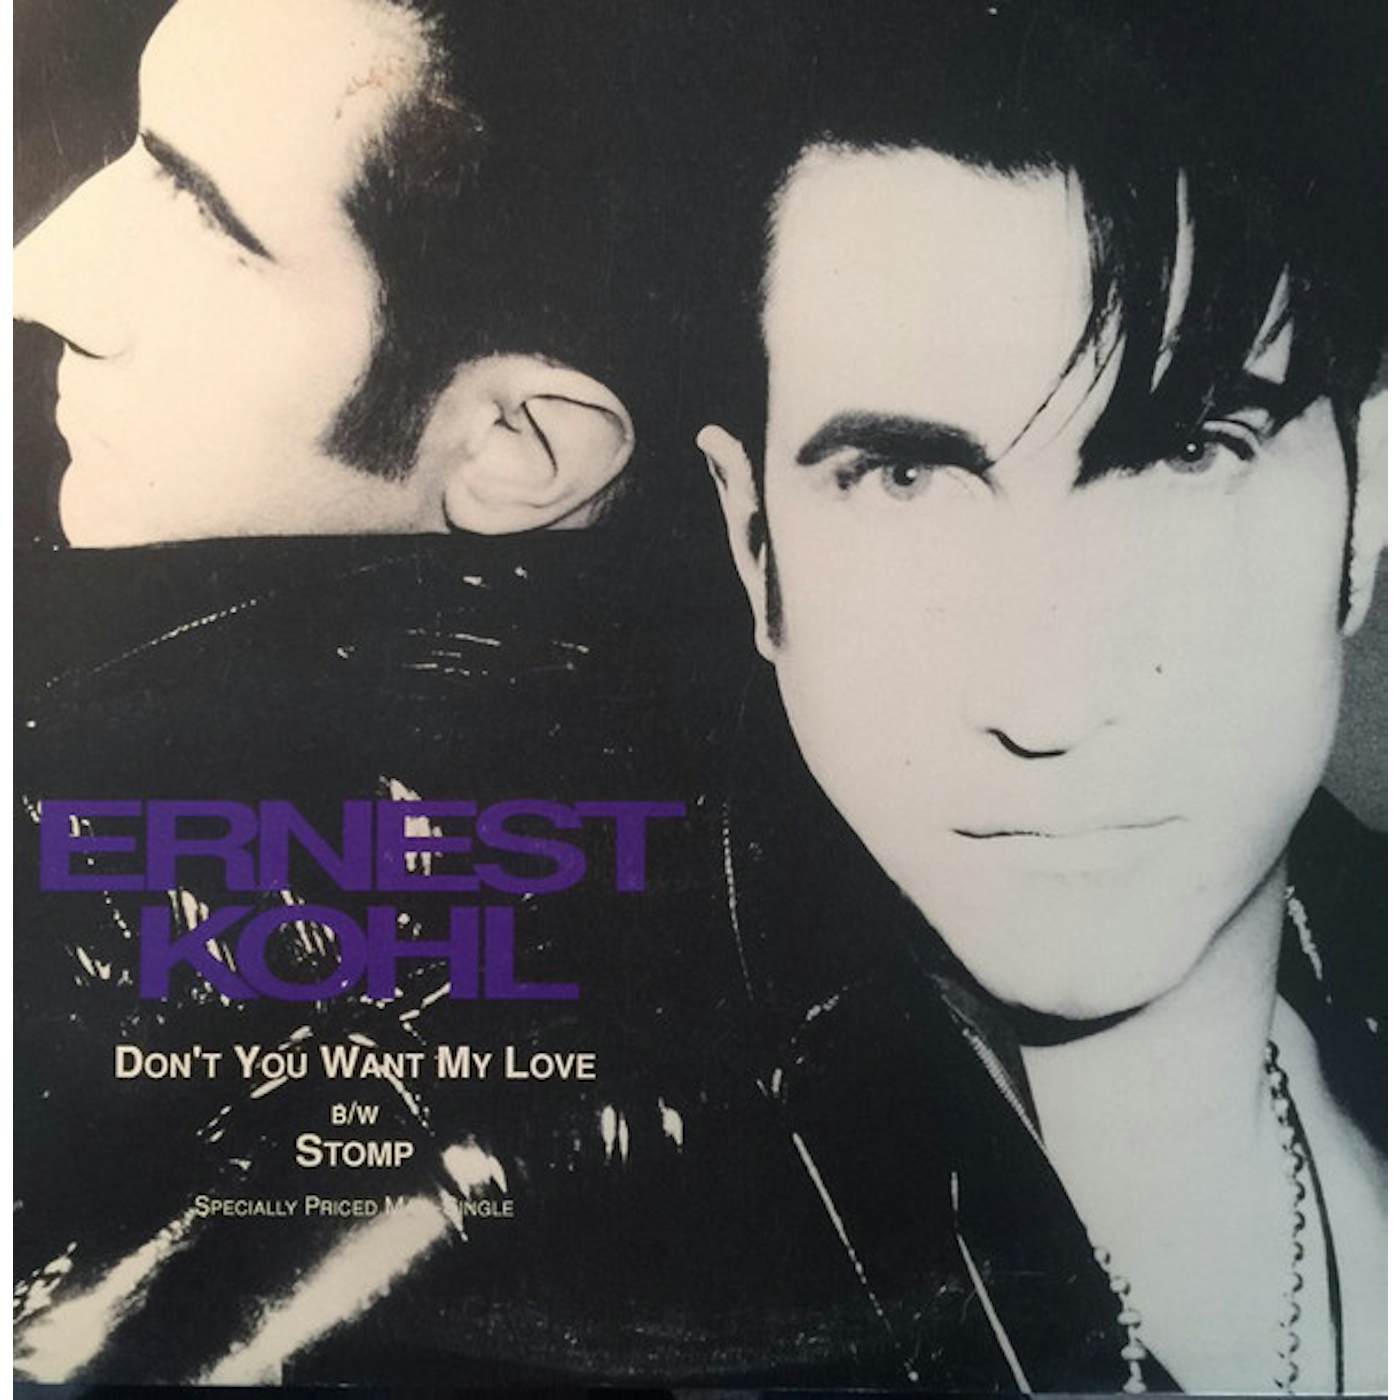 Ernest Kohl DONT YOU WANT MY LOVE Vinyl Record